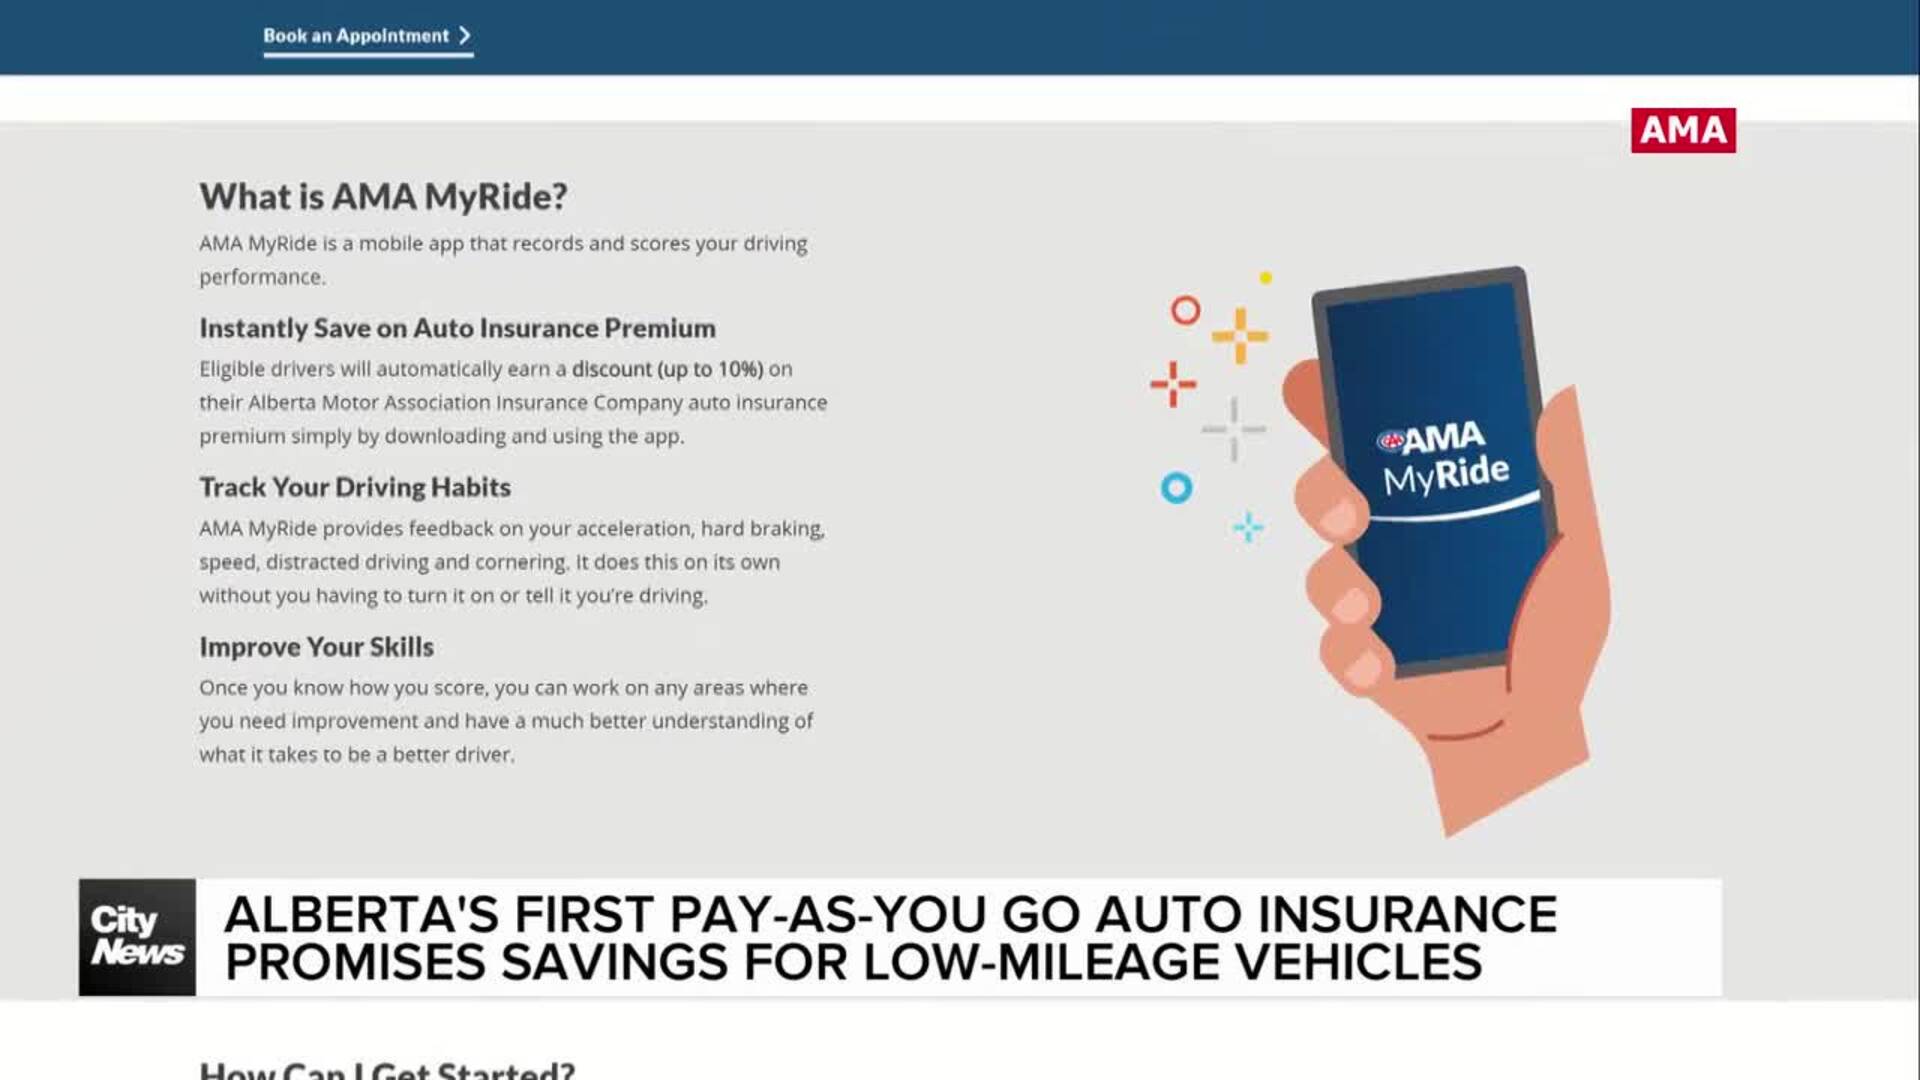 Alberta's first pay-as-you go auto insurance policy